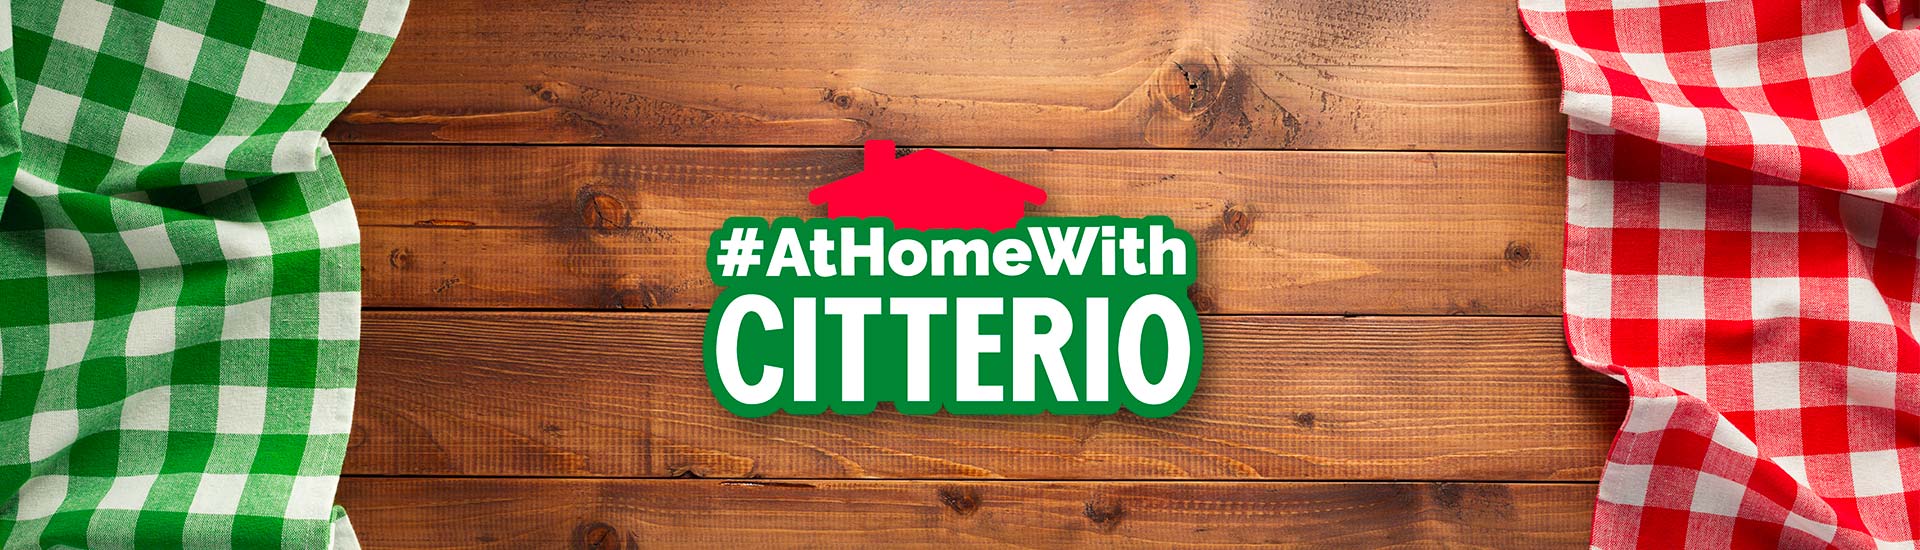 At home with Citterio